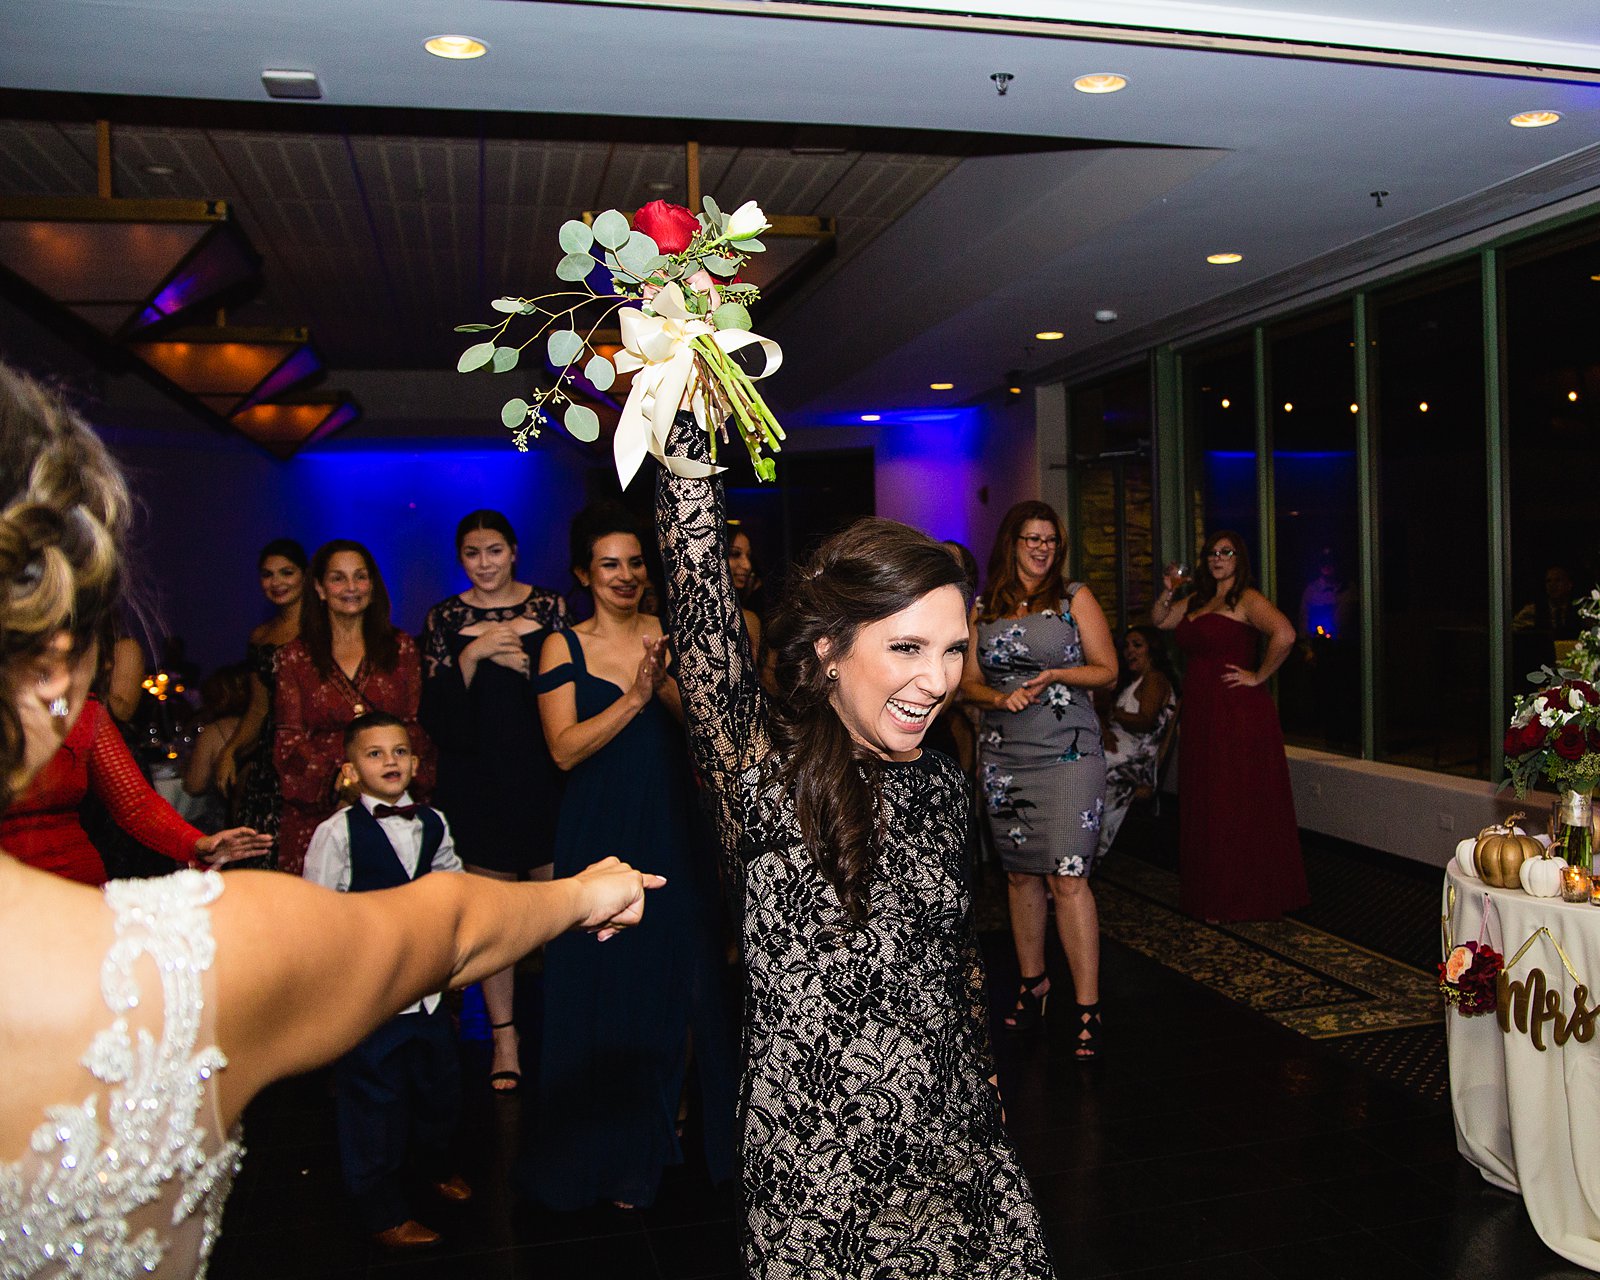 Bouquet toss at Troon North wedding reception by Scottsdale wedding photographer PMA Photography.